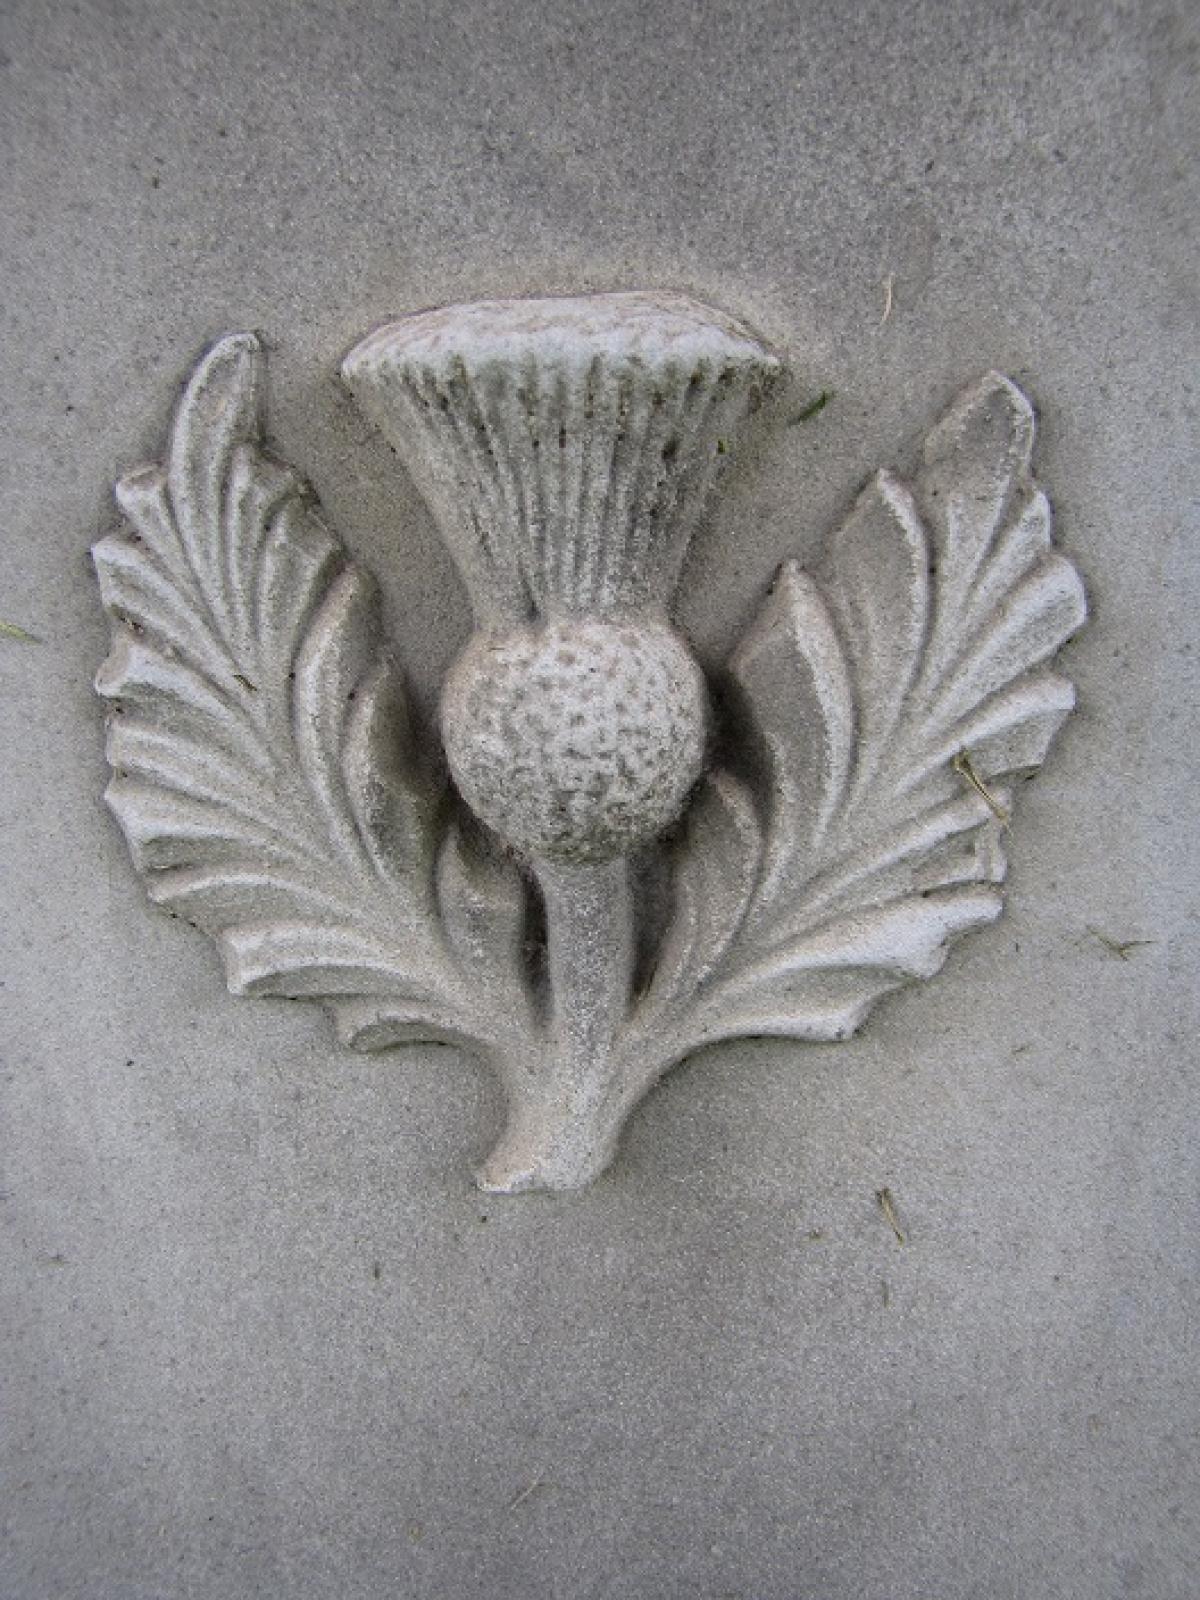 OK, Grove, Headstone Symbols and Meanings, Thistle